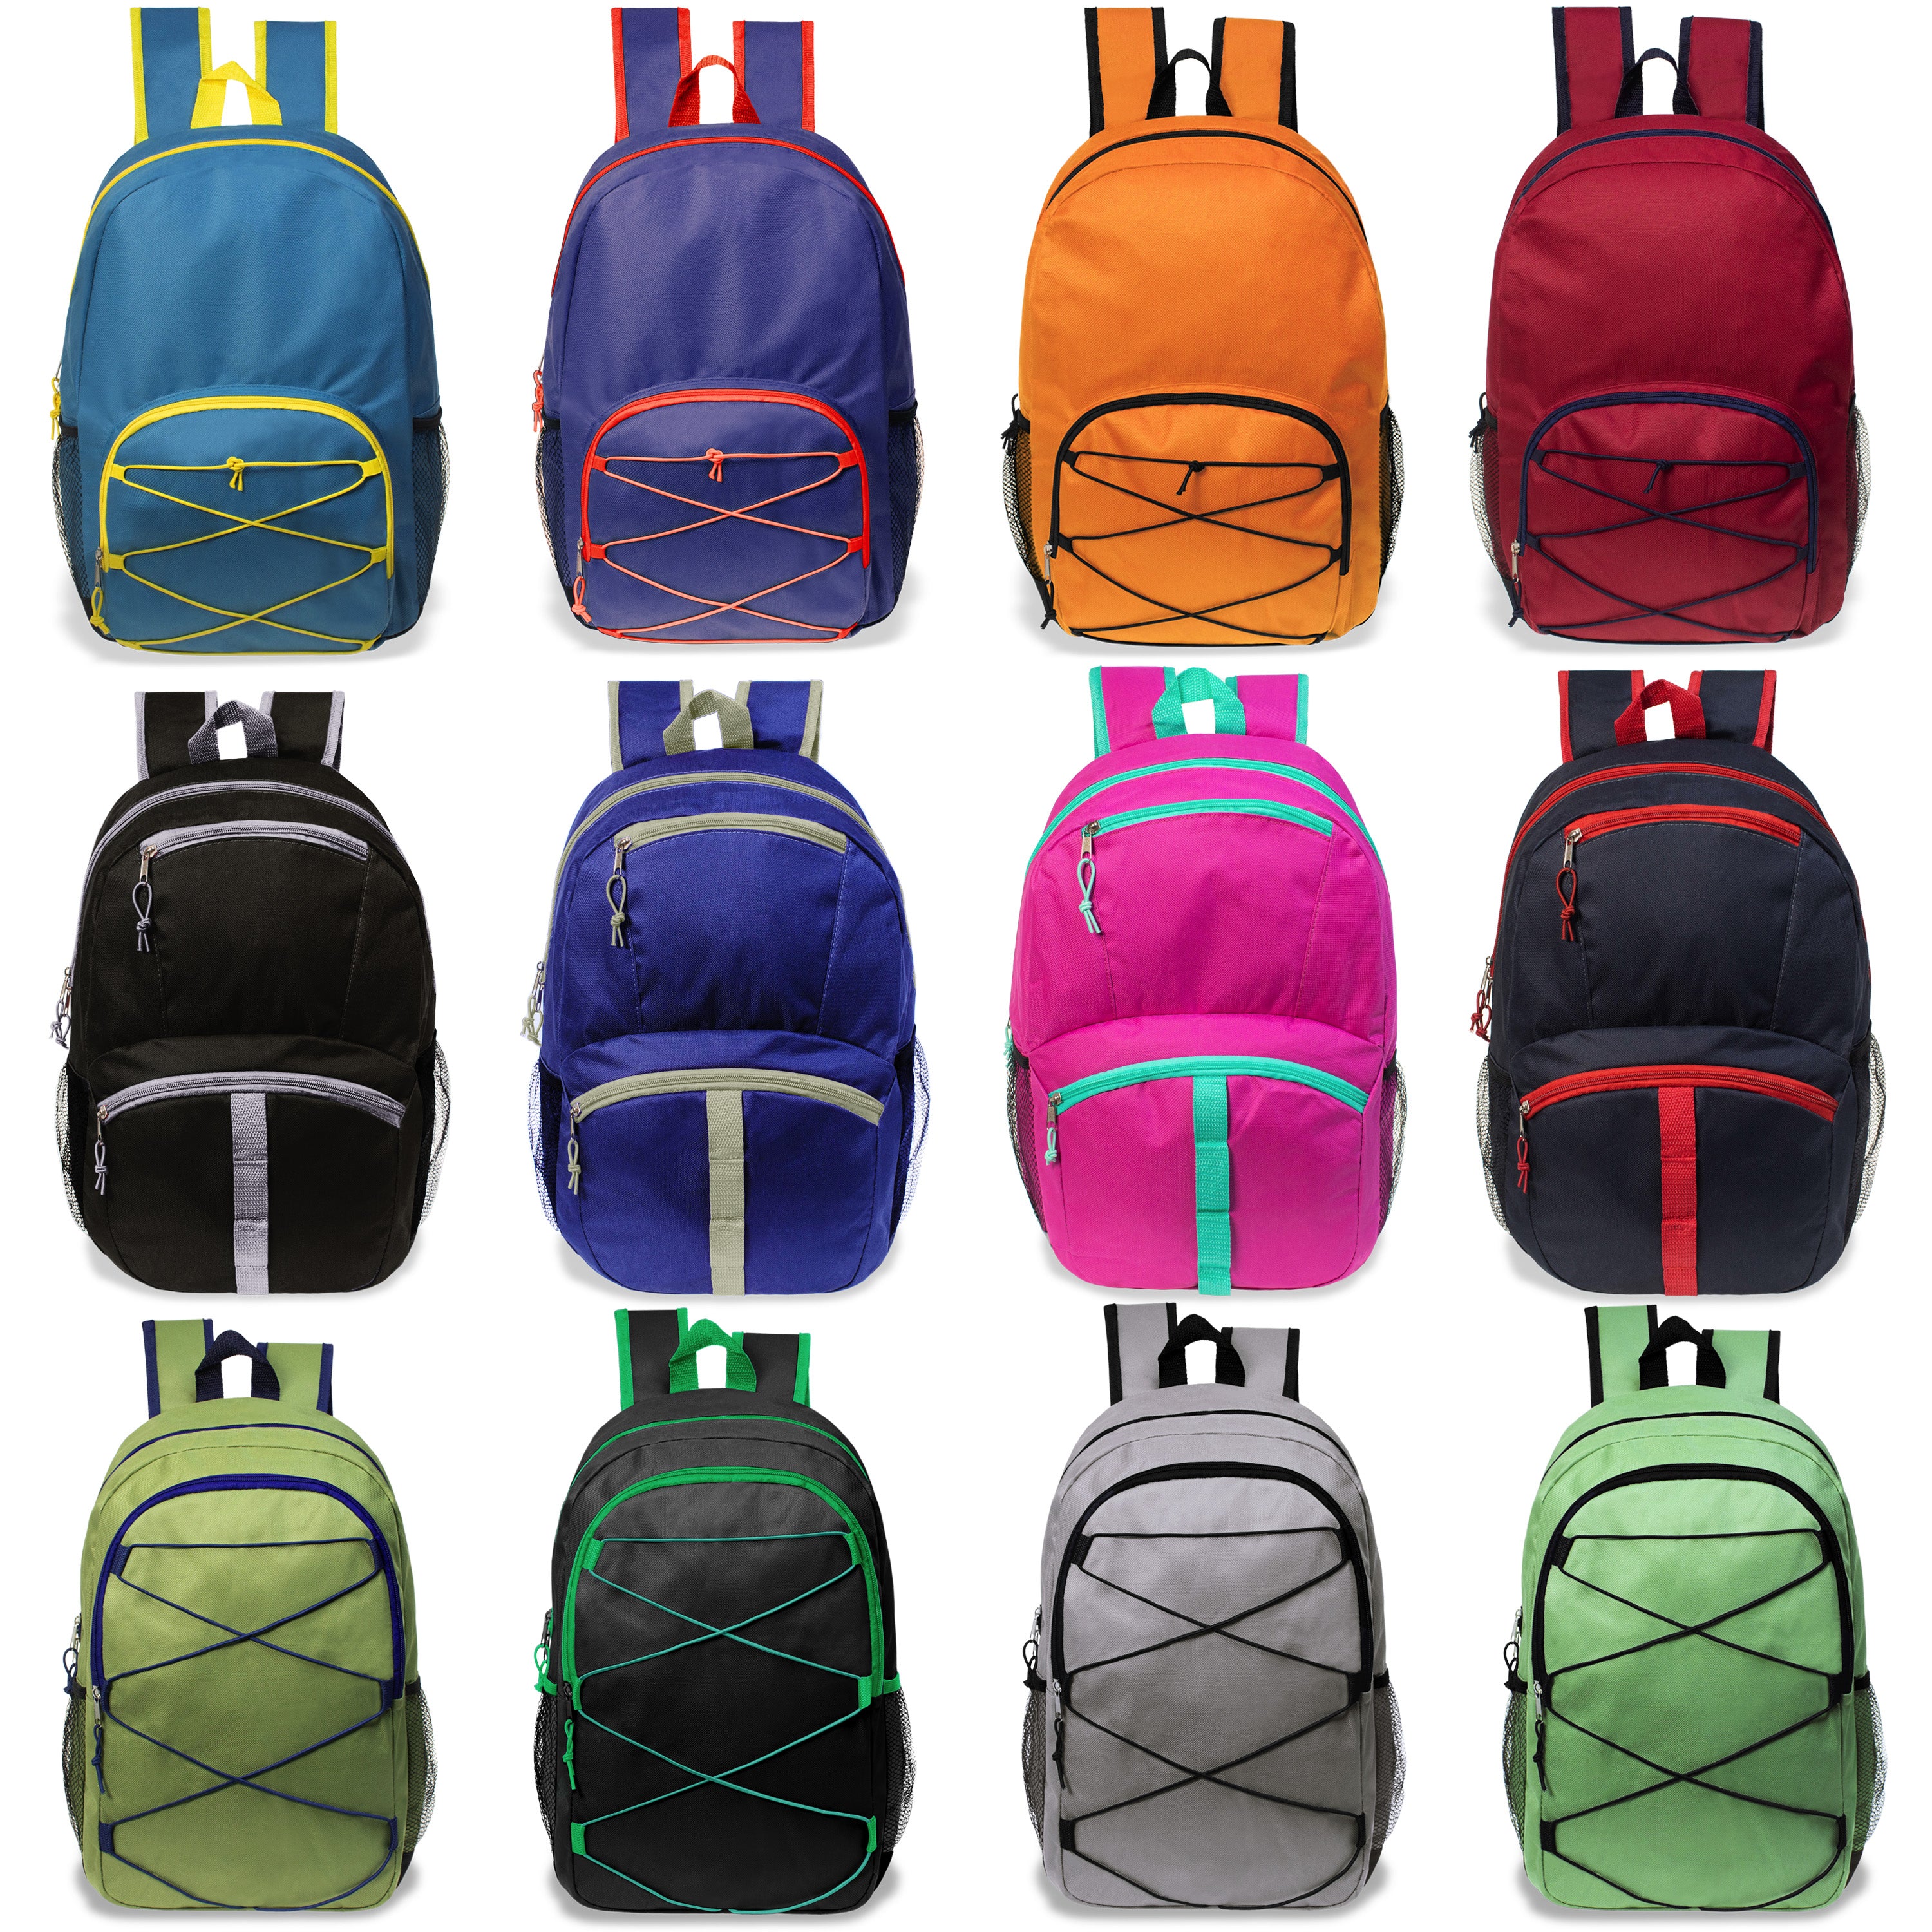 17" Bungee Wholesale Backpack in Assorted Colors and Styles - Bulk Case of 24